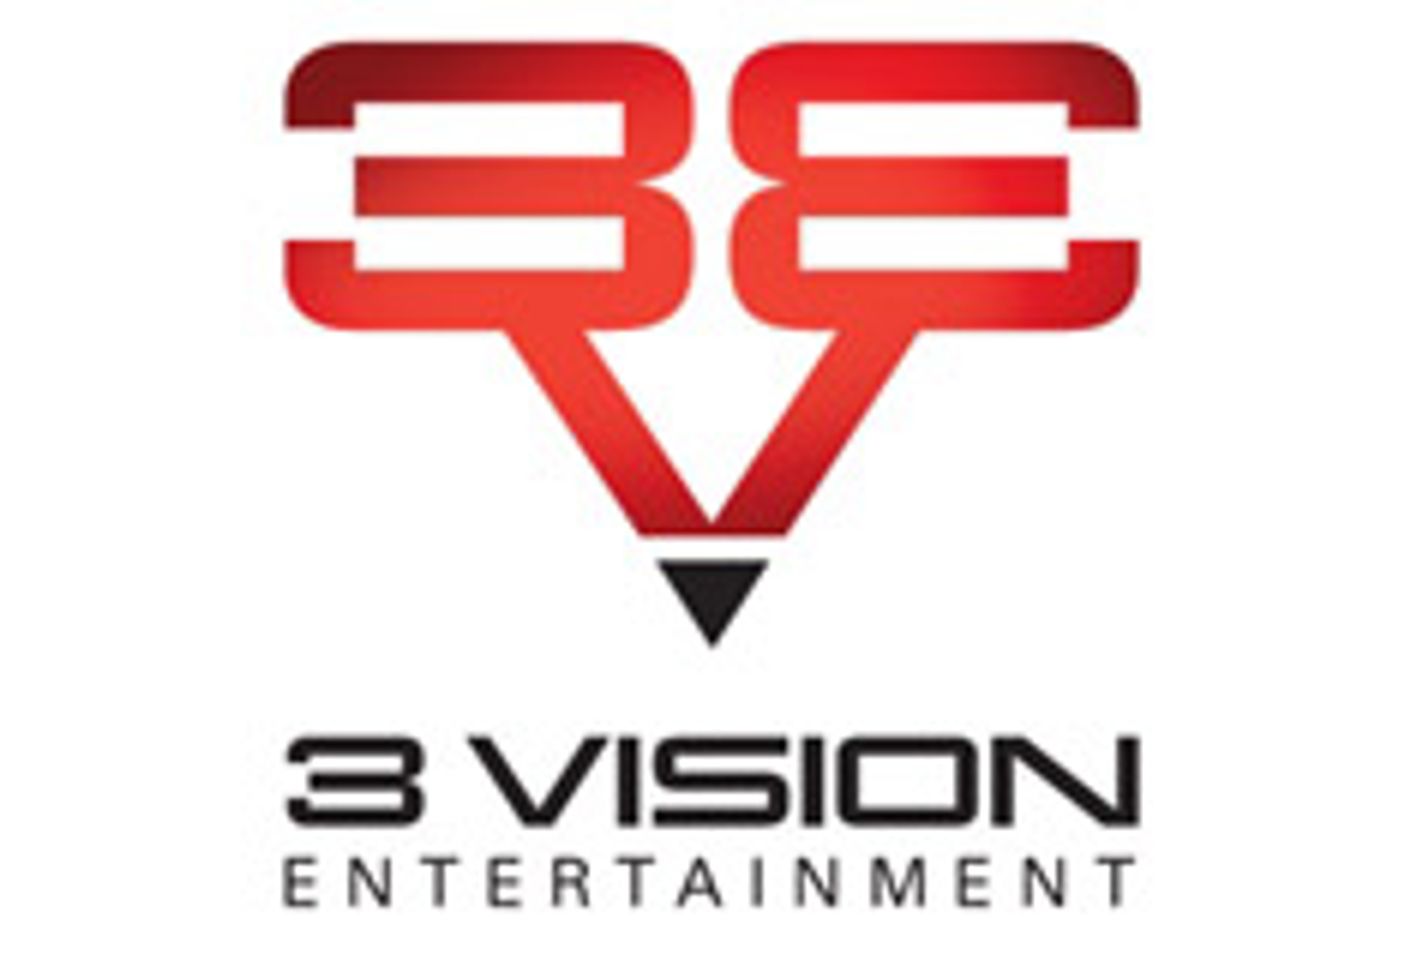 3 Vision Entertainment Signs Deal with XTV Networks